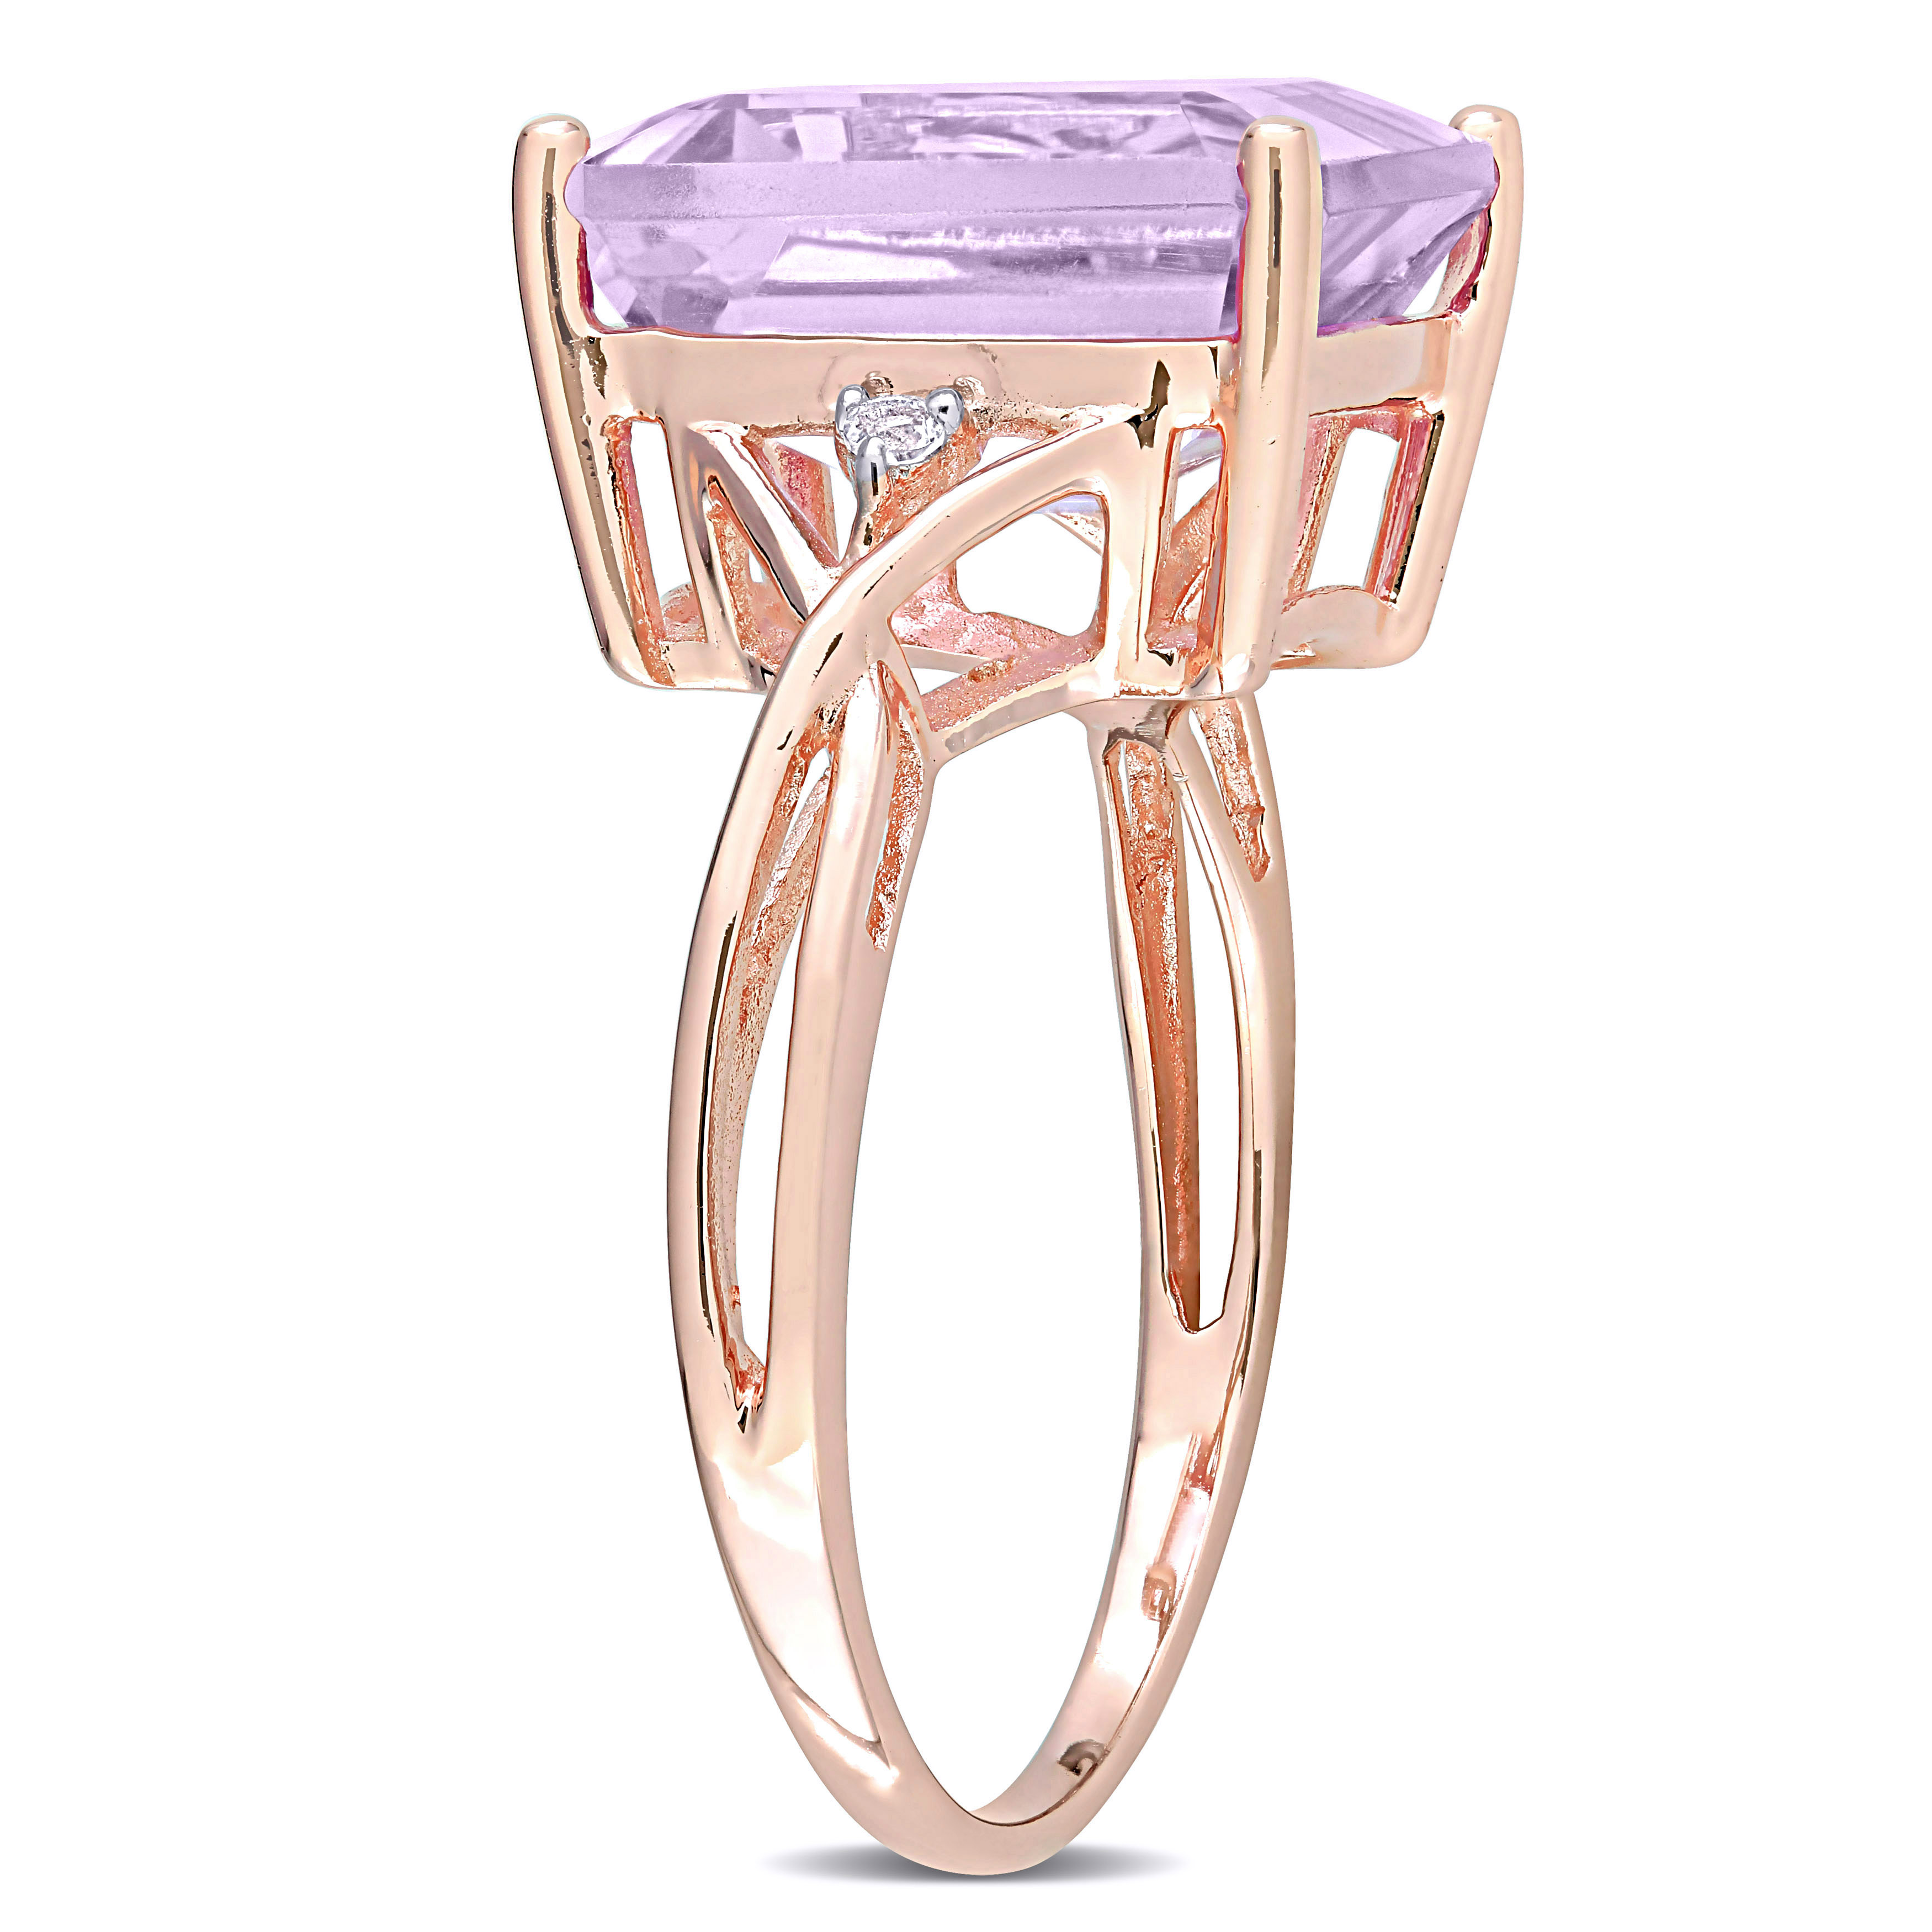 5 7/8 CT TGW Rose de France and White Topaz Cocktail Ring in Rose Plated Sterling Silver